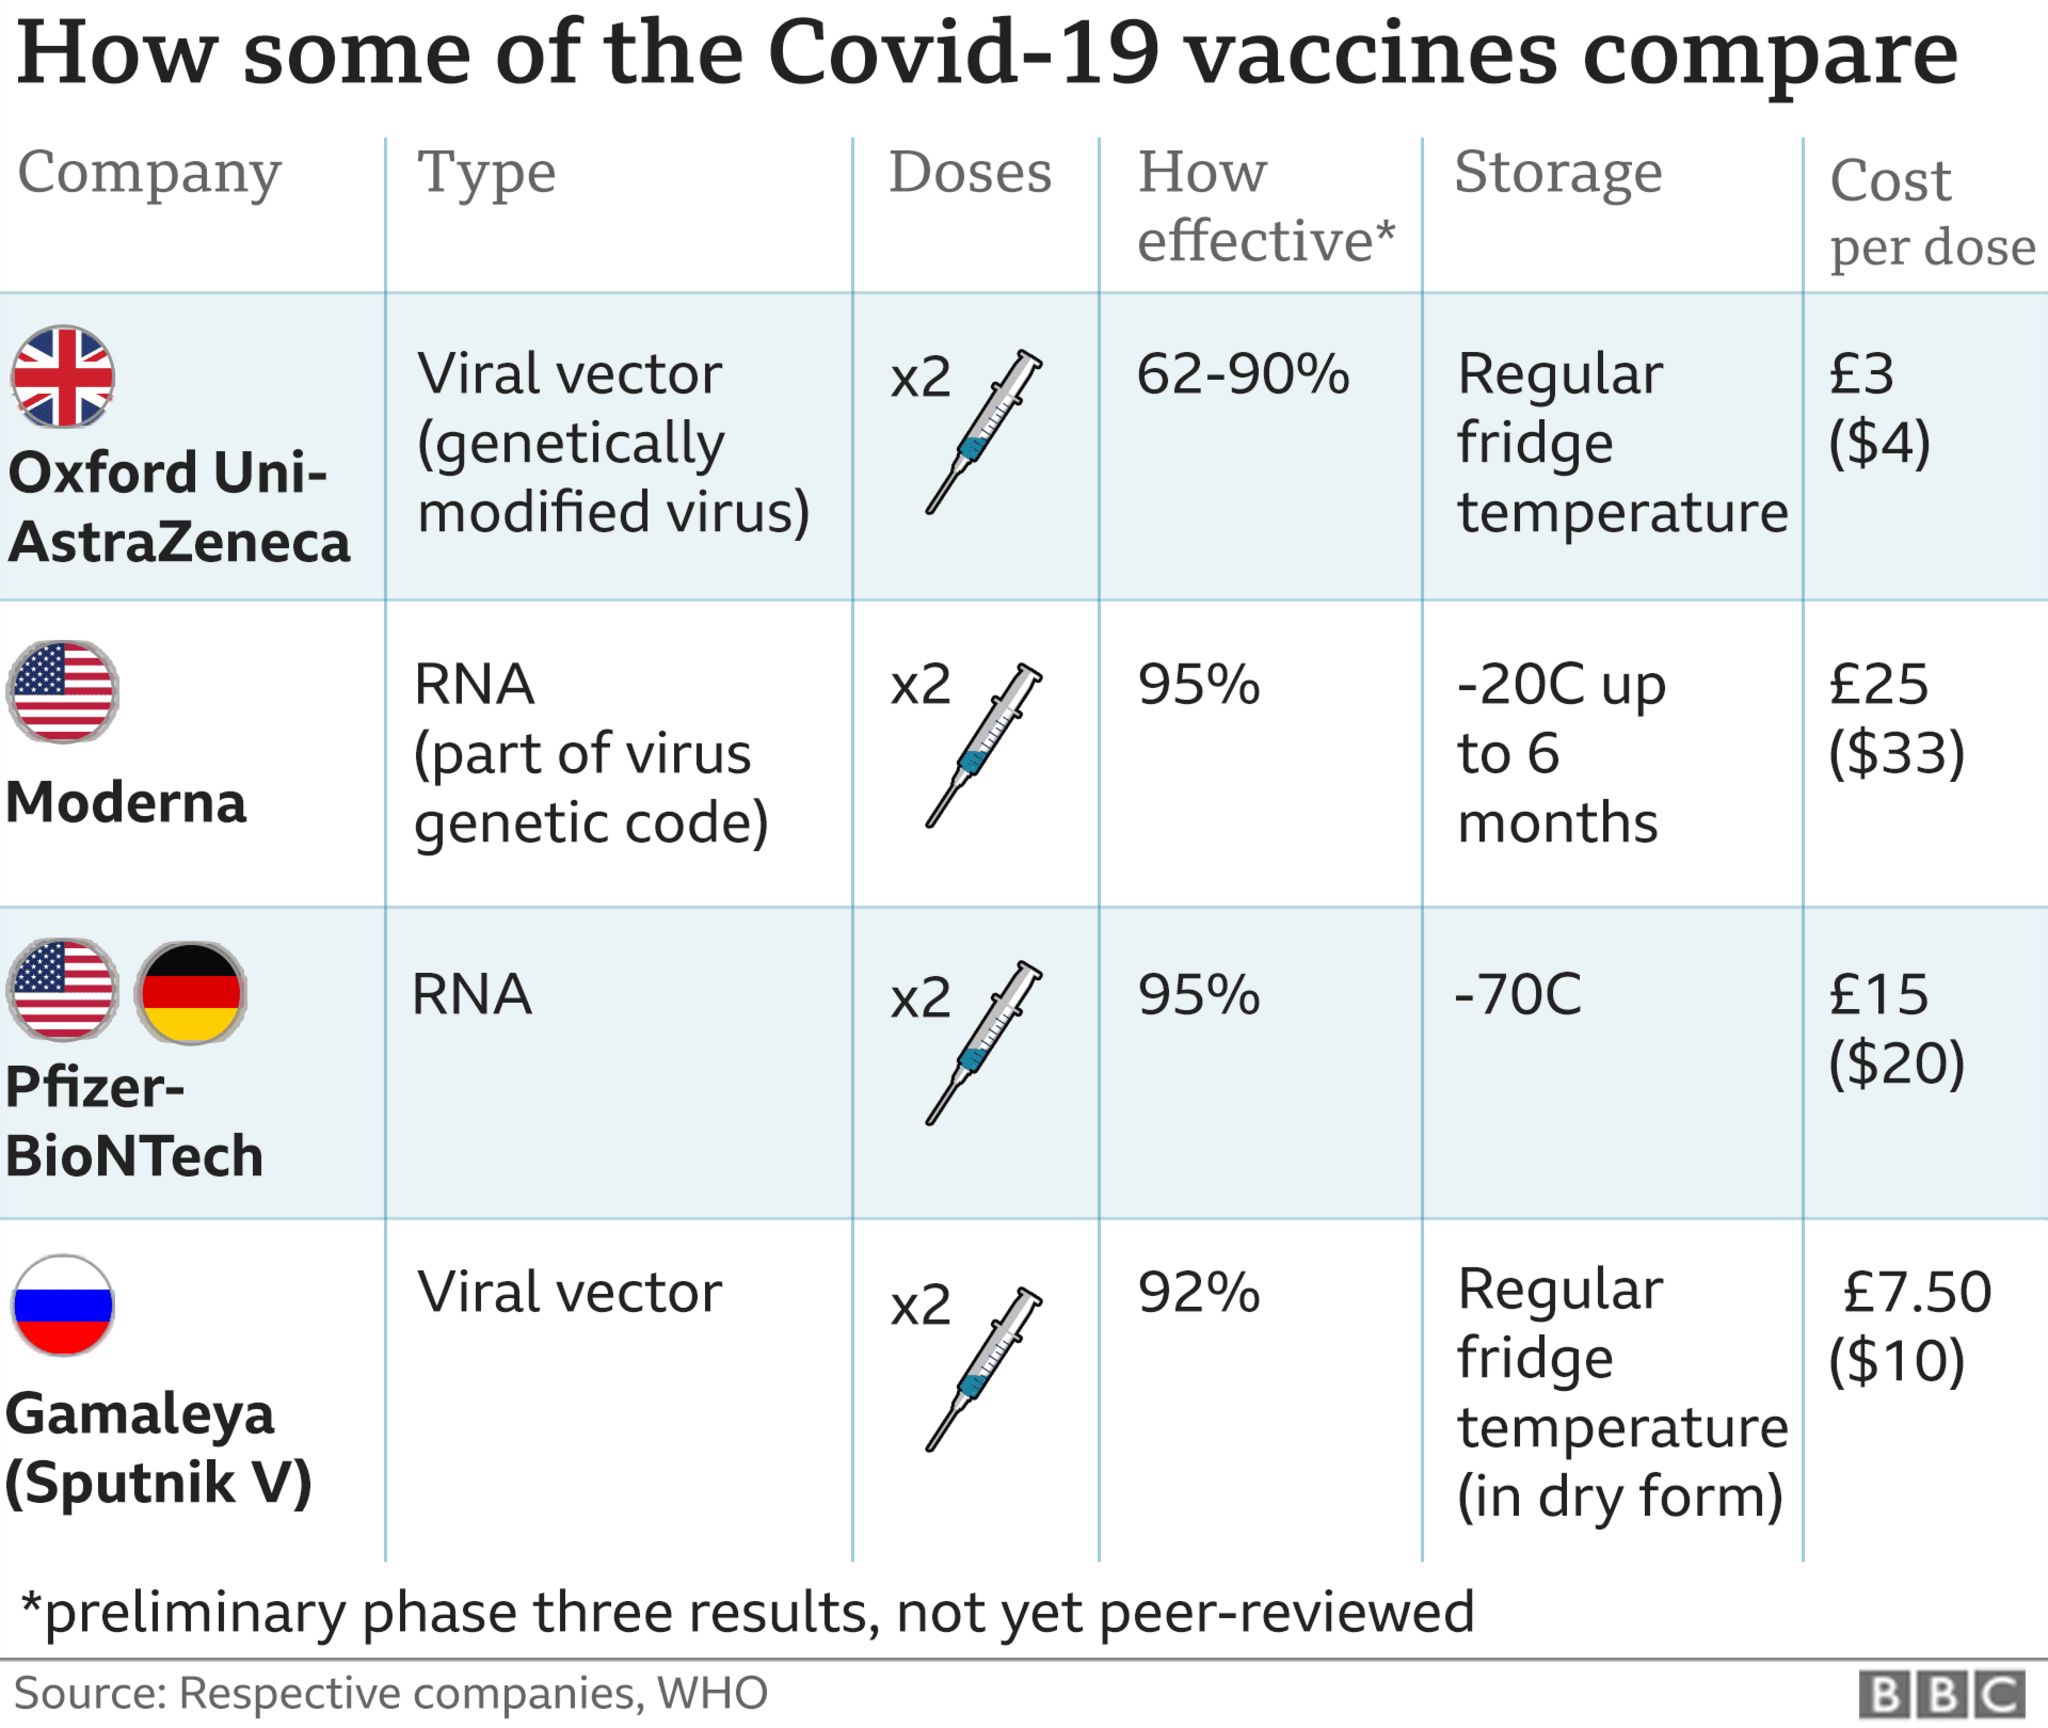 Covid Biden vows 100m vaccinations for US in first 100 days  BBC News